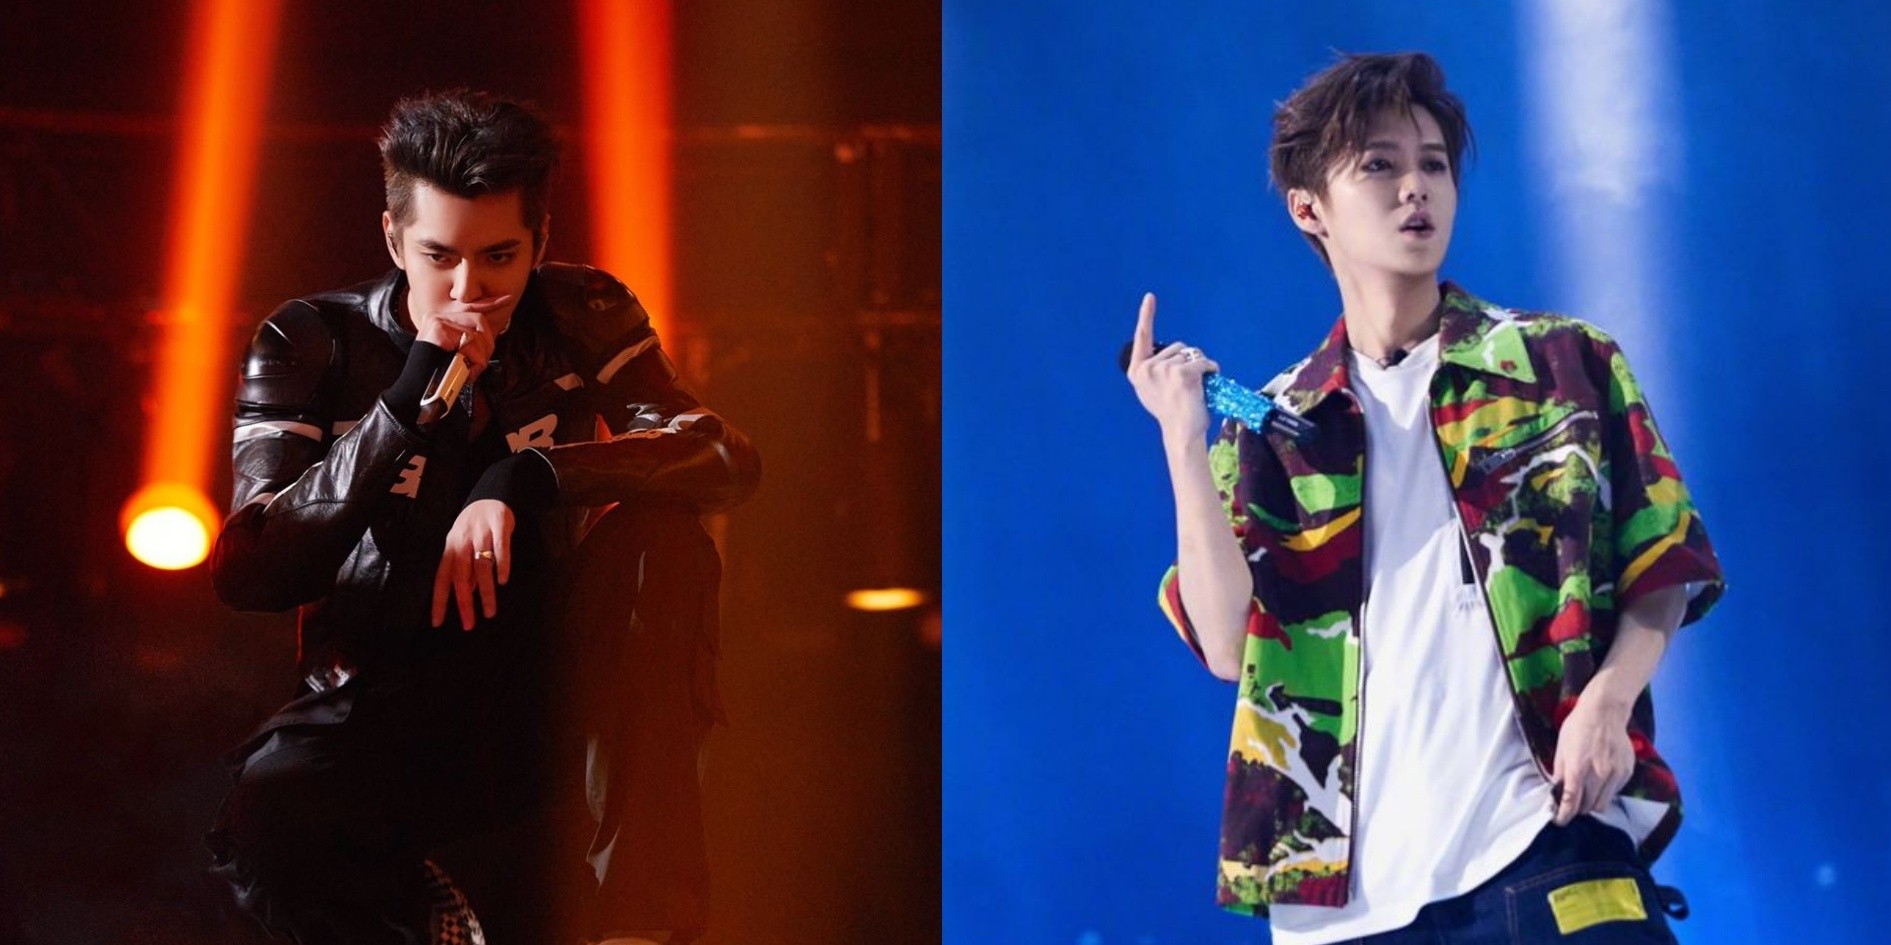 Kris Wu rumored to join Luhan and Tao in 'Produce Camp 2020